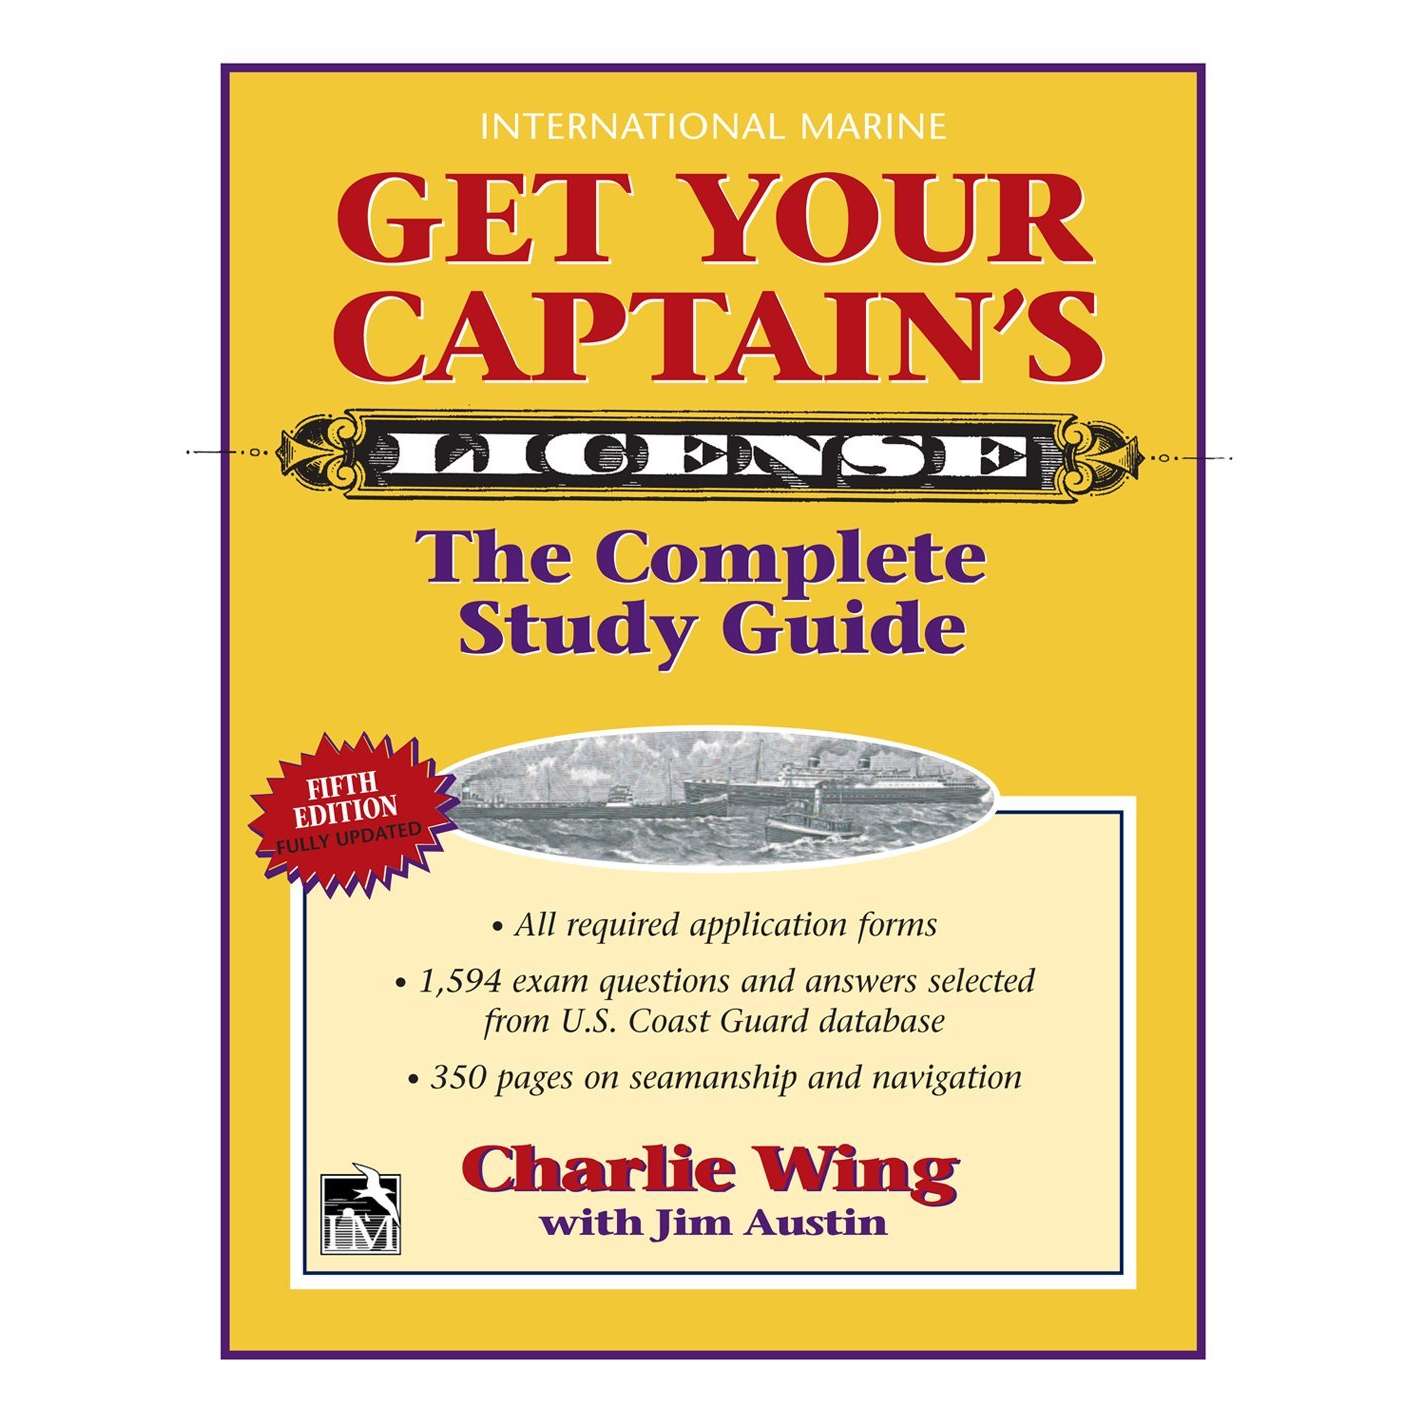 Nautical Charts & Books :: Mariner Training :: Get Your Captain's